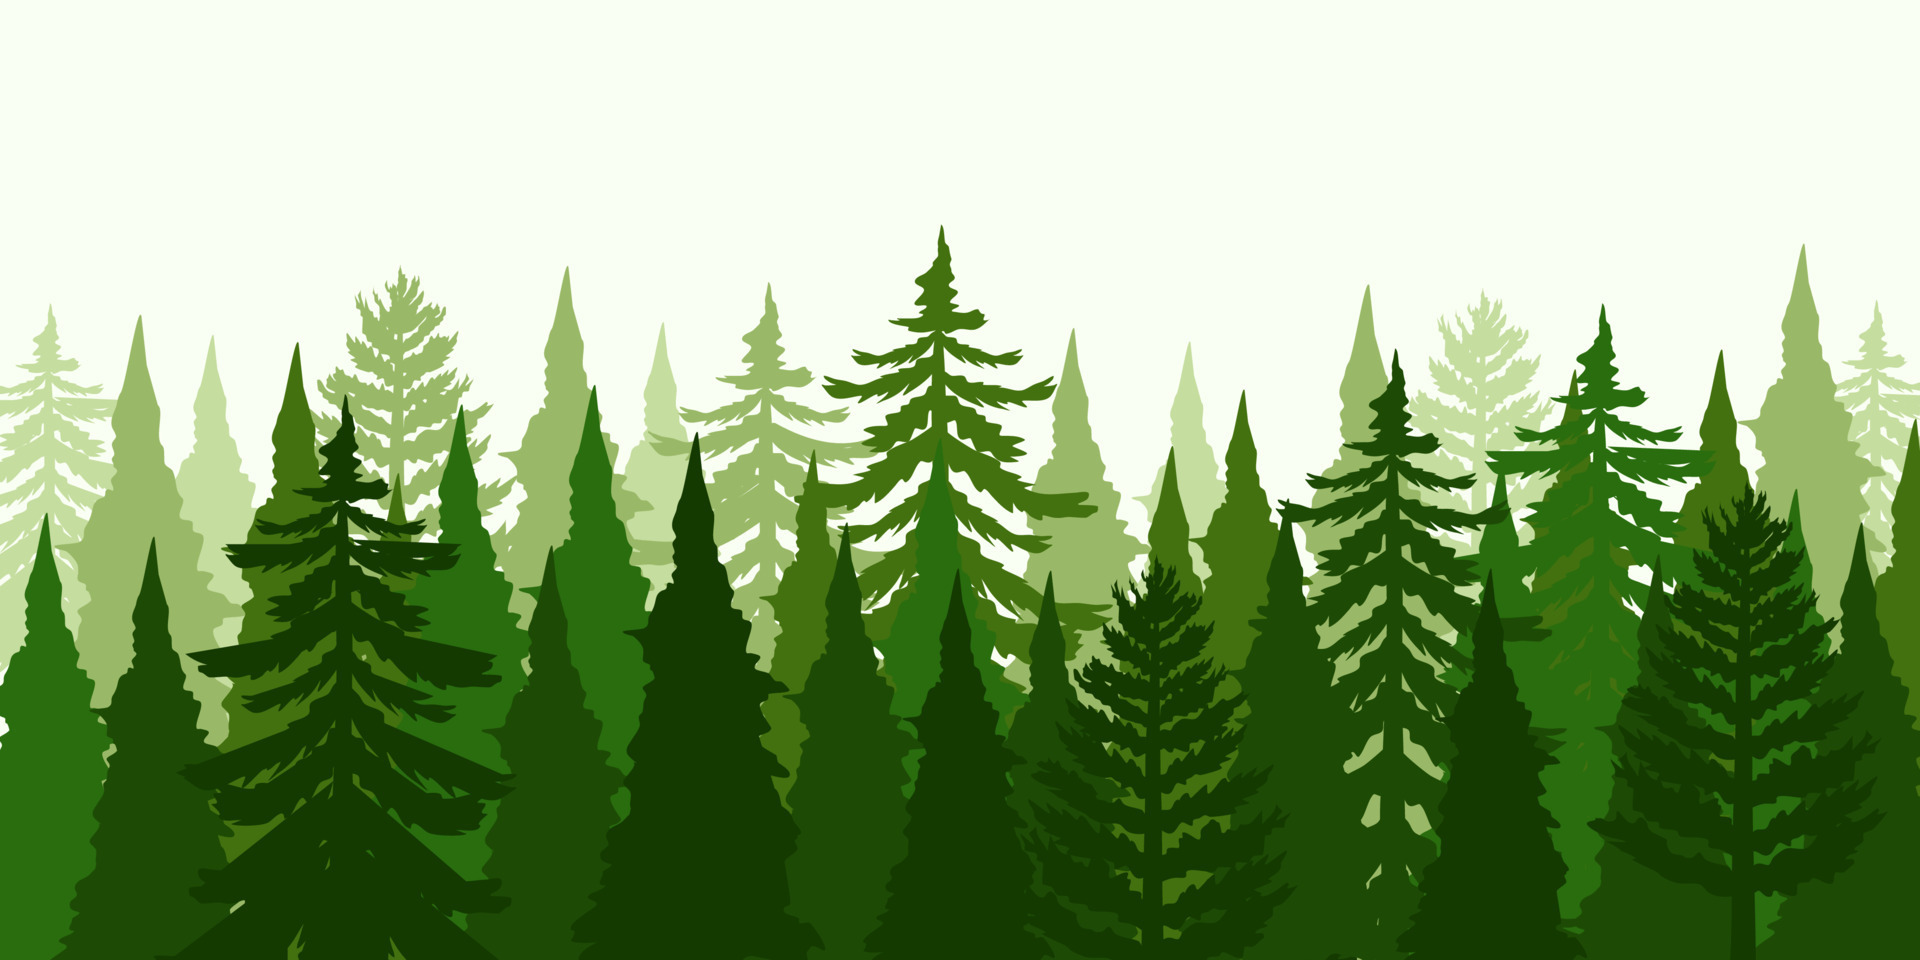 pine trees forest silhouette nature landscape background 10826173